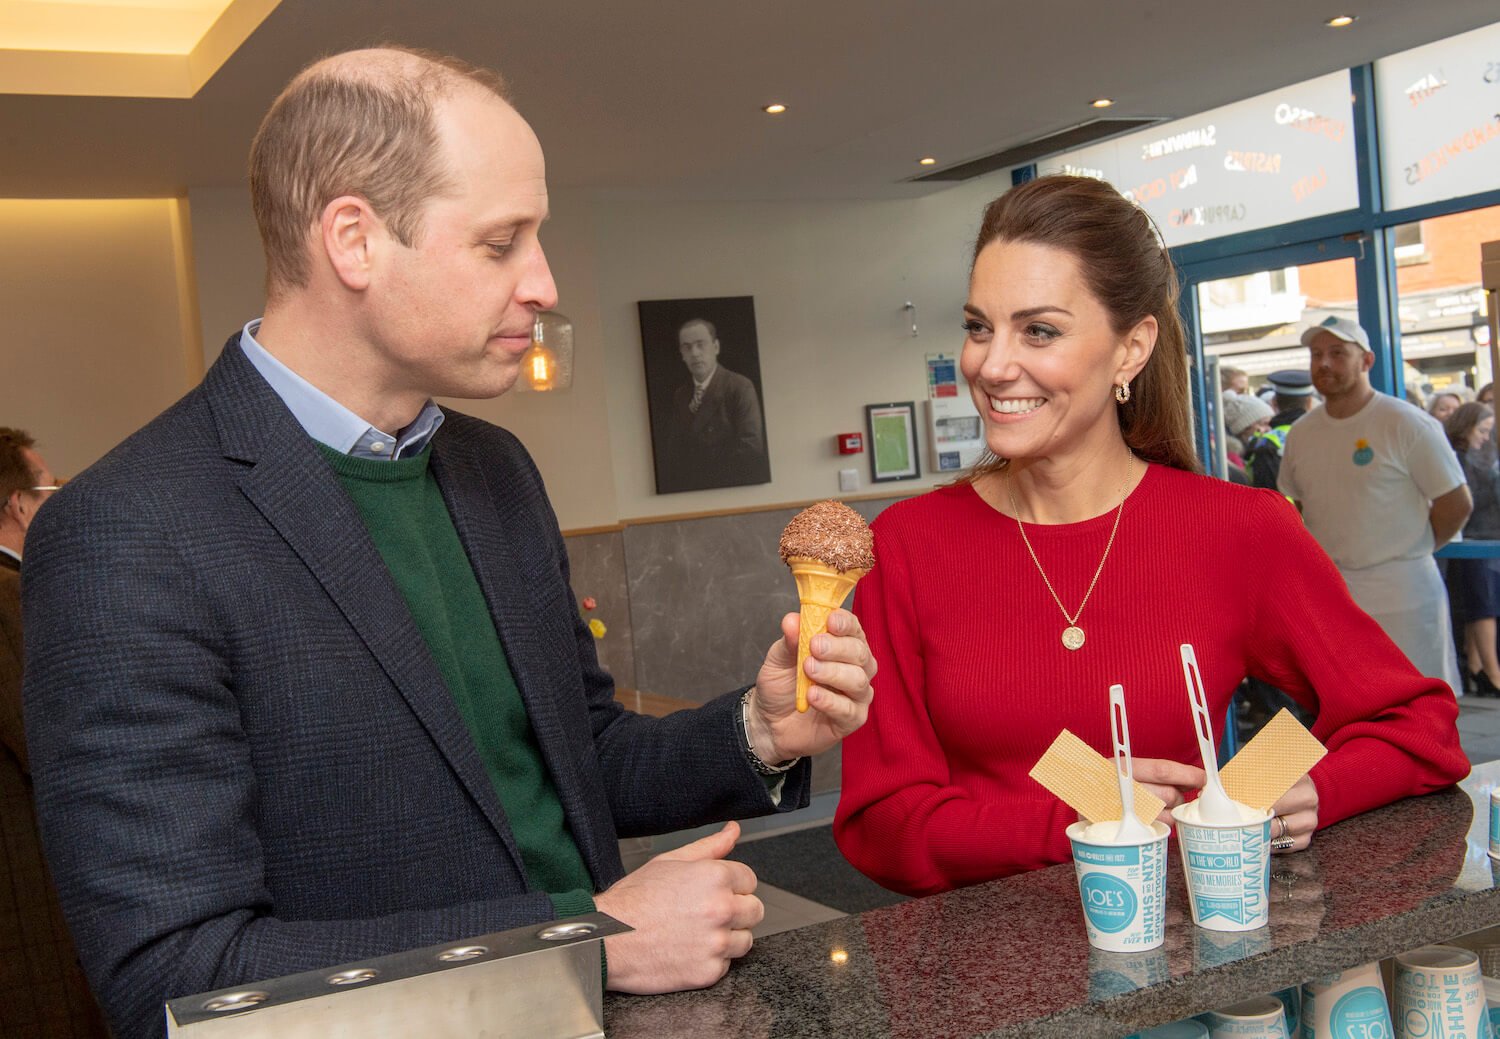 Kate Middleton, seen with Prince William, breaks one of Queen Elizabeth's rules when she talks about her favorite foods